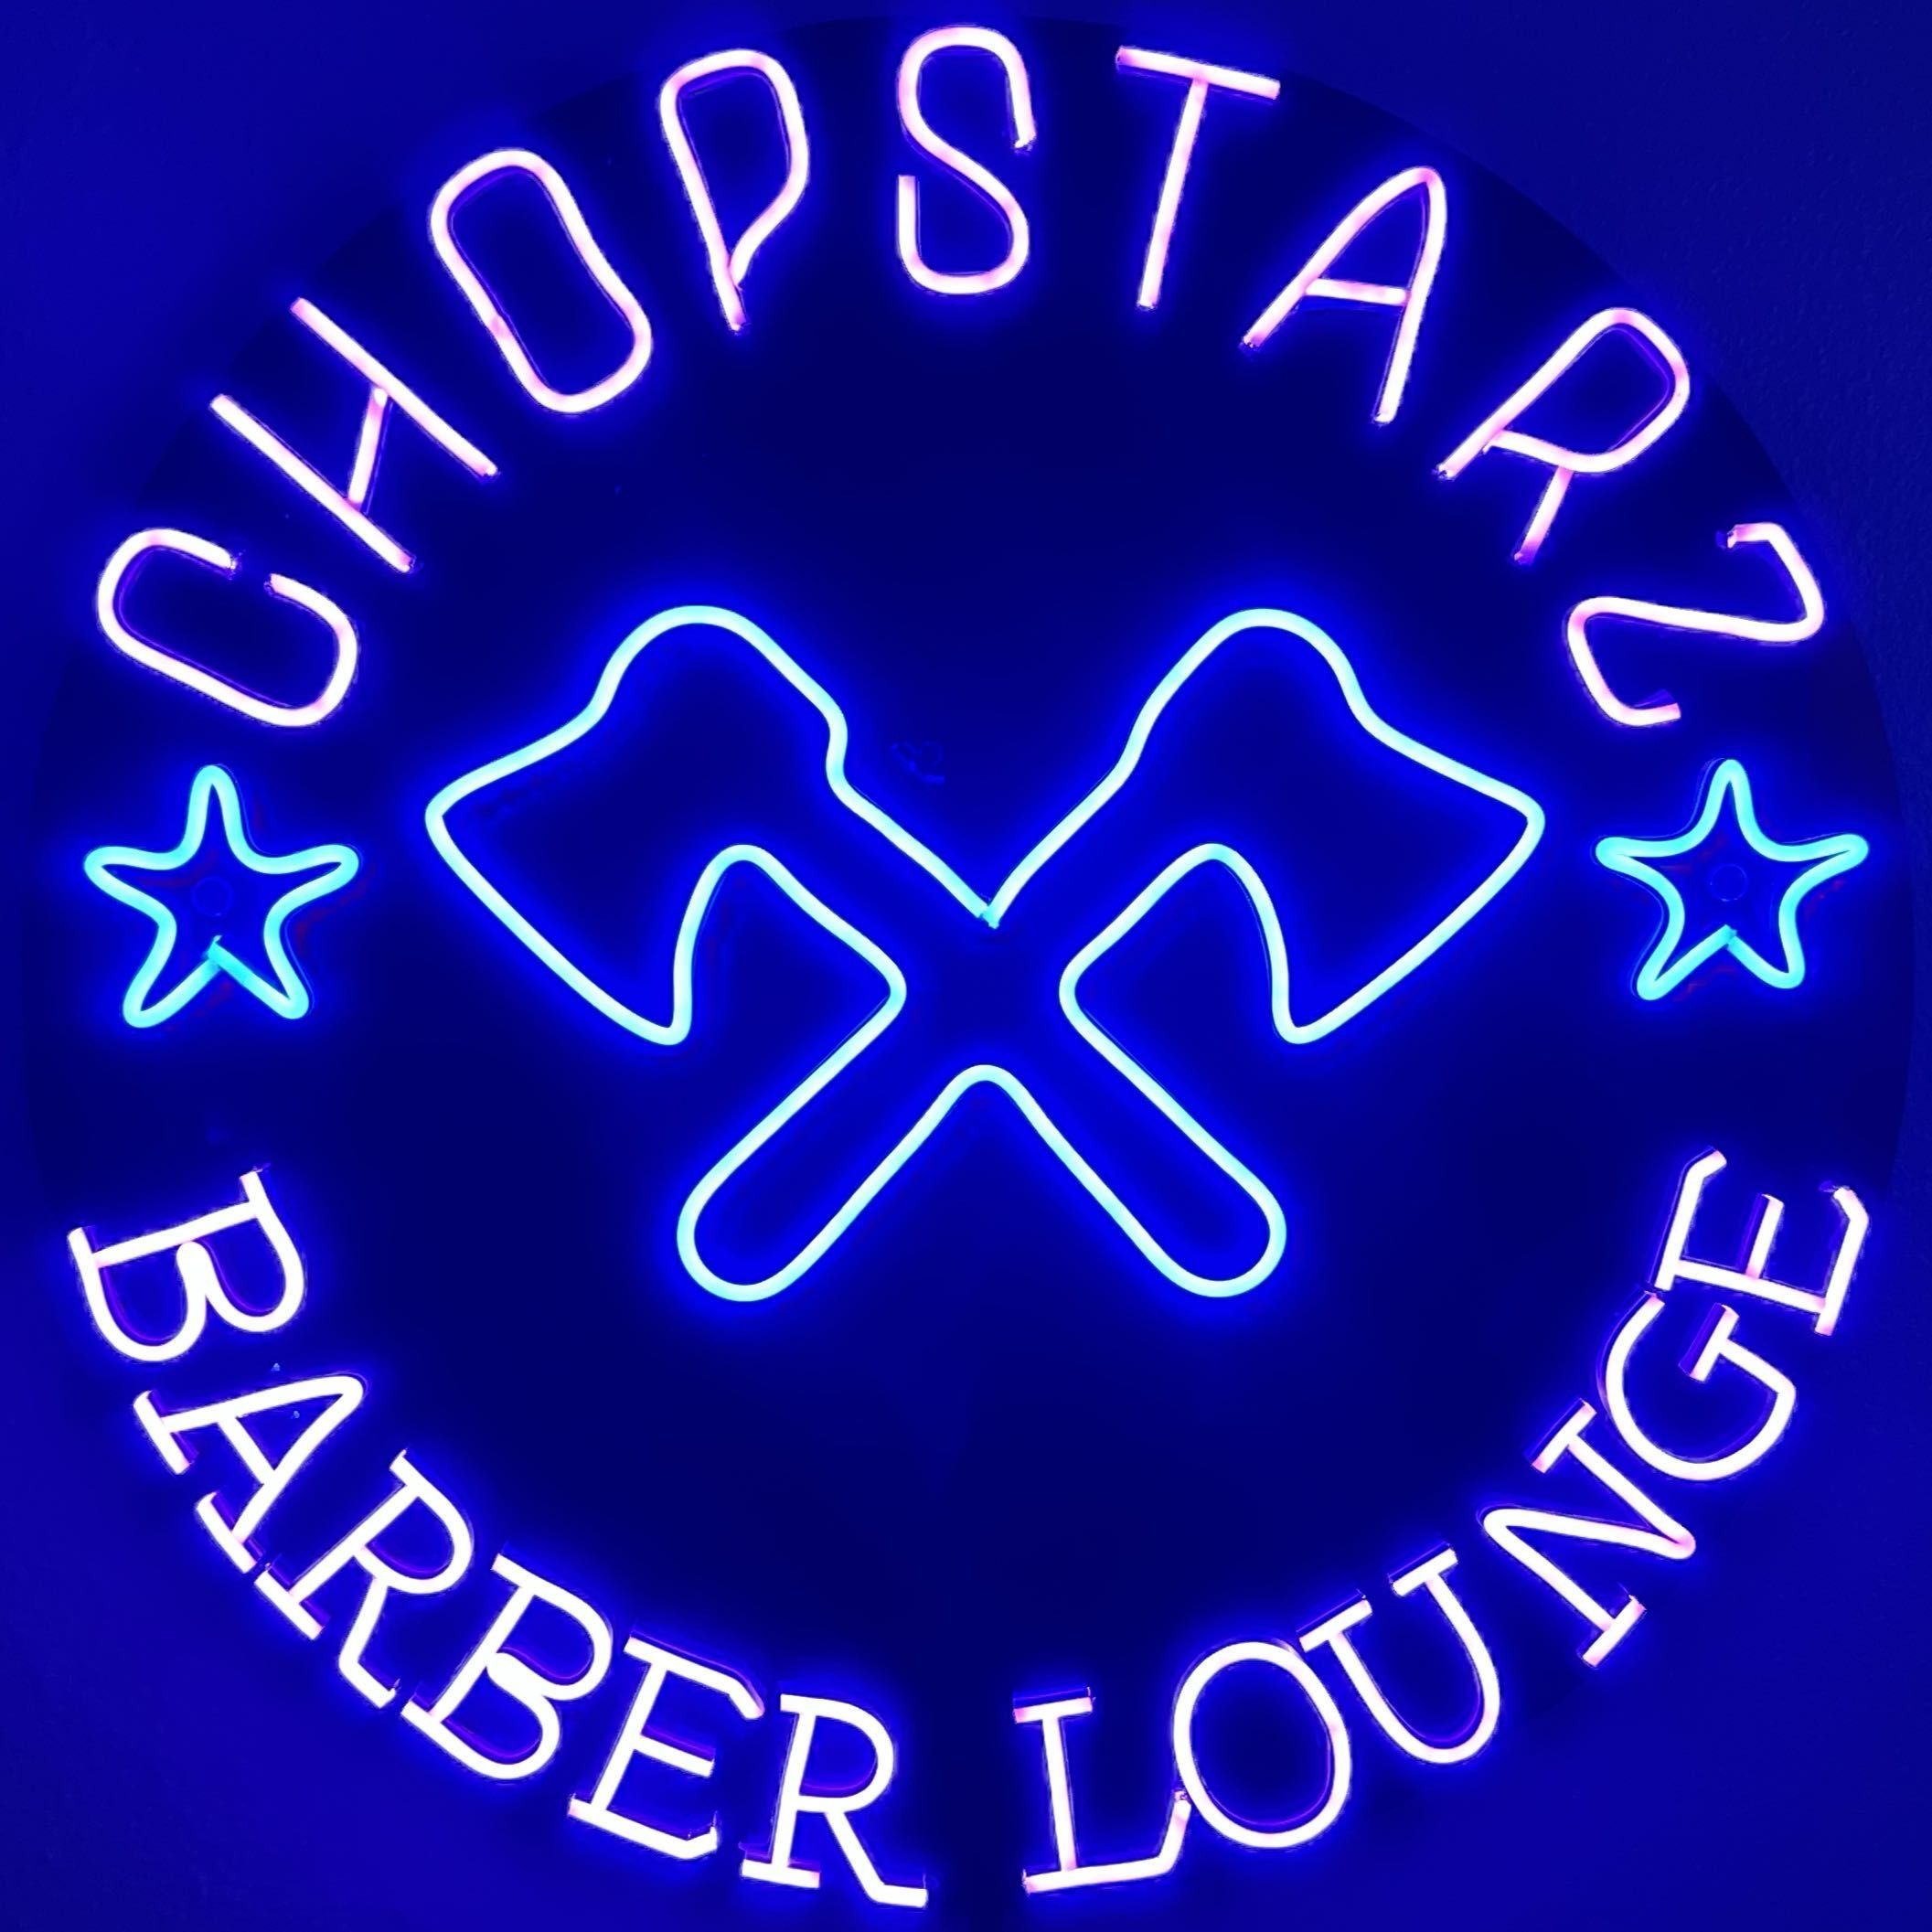 ChopstaRich, 2646 South Loop W Fwy Svc Rd Houston, Tx, Suite # 180, Houston, 77025